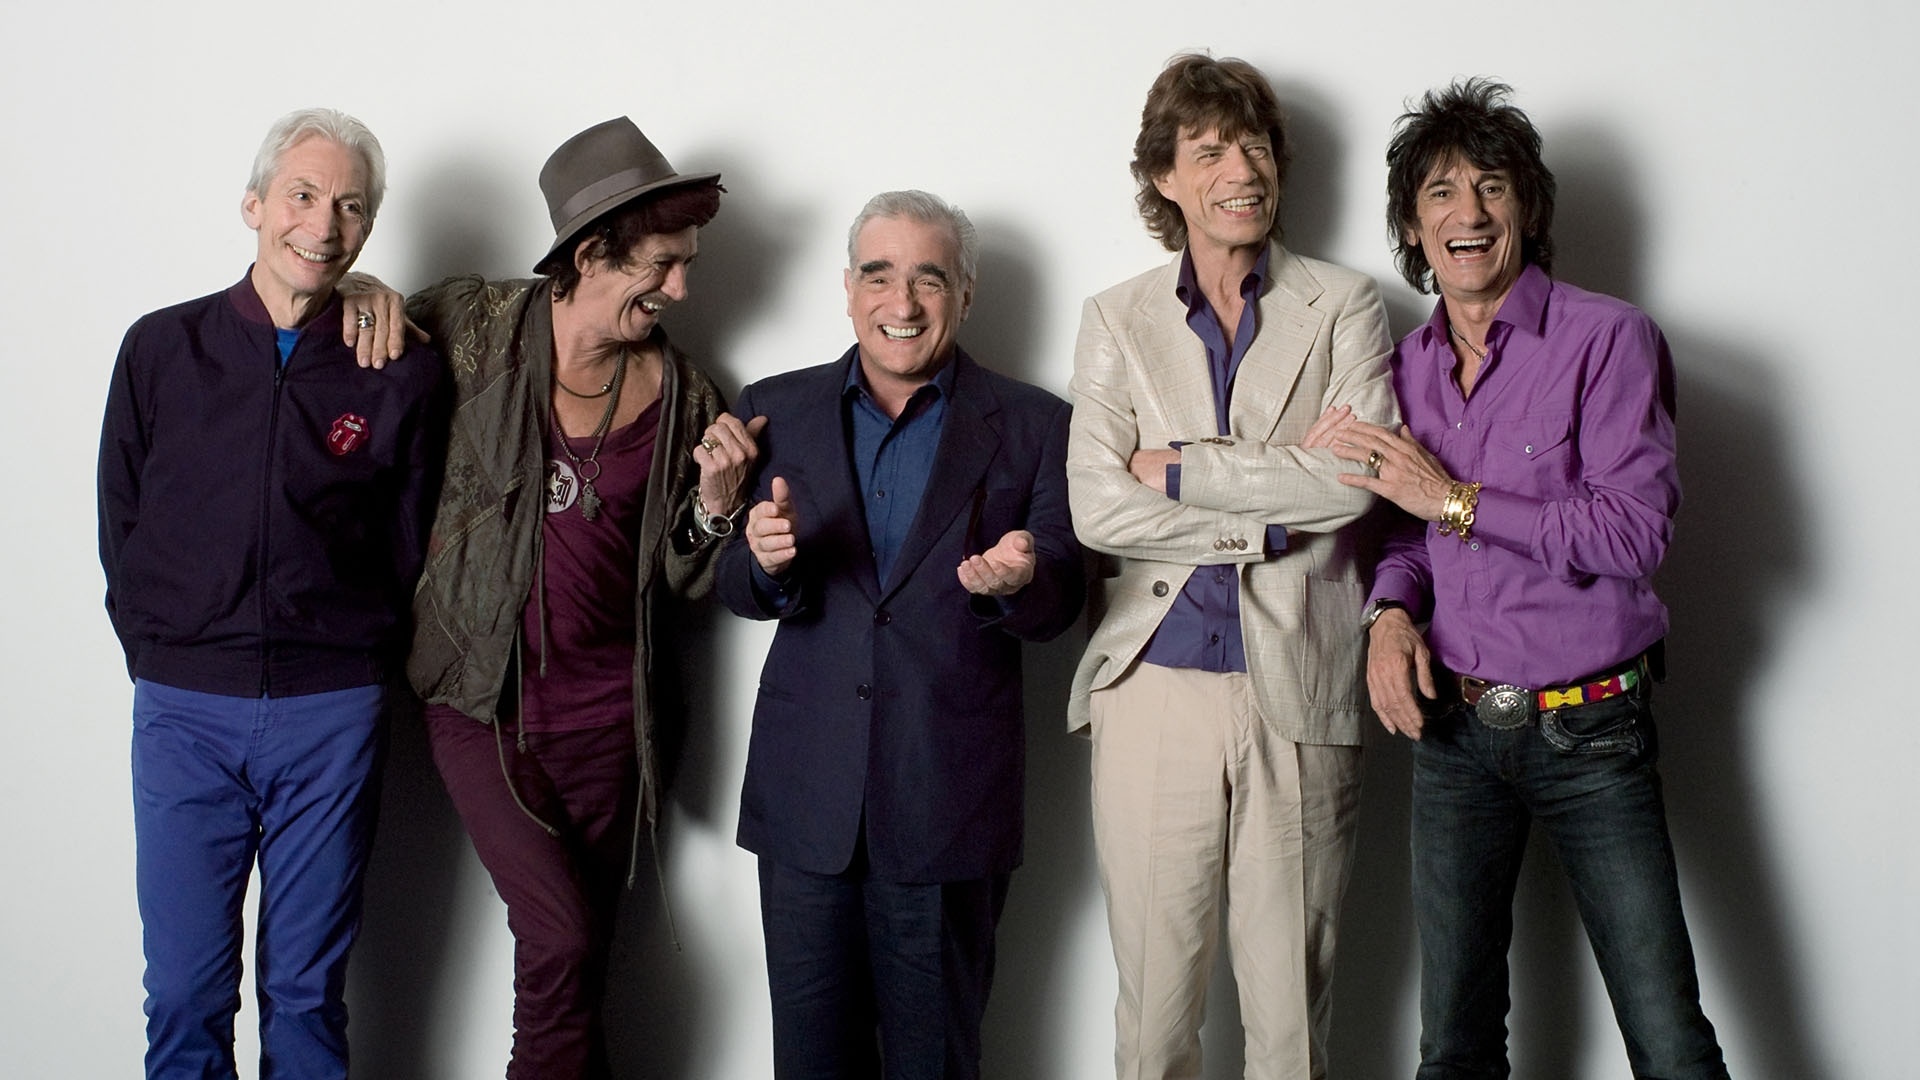 Purple Gentleman band fashion, The Rolling Stones, Coolwallpapers, 1920x1080 Full HD Desktop